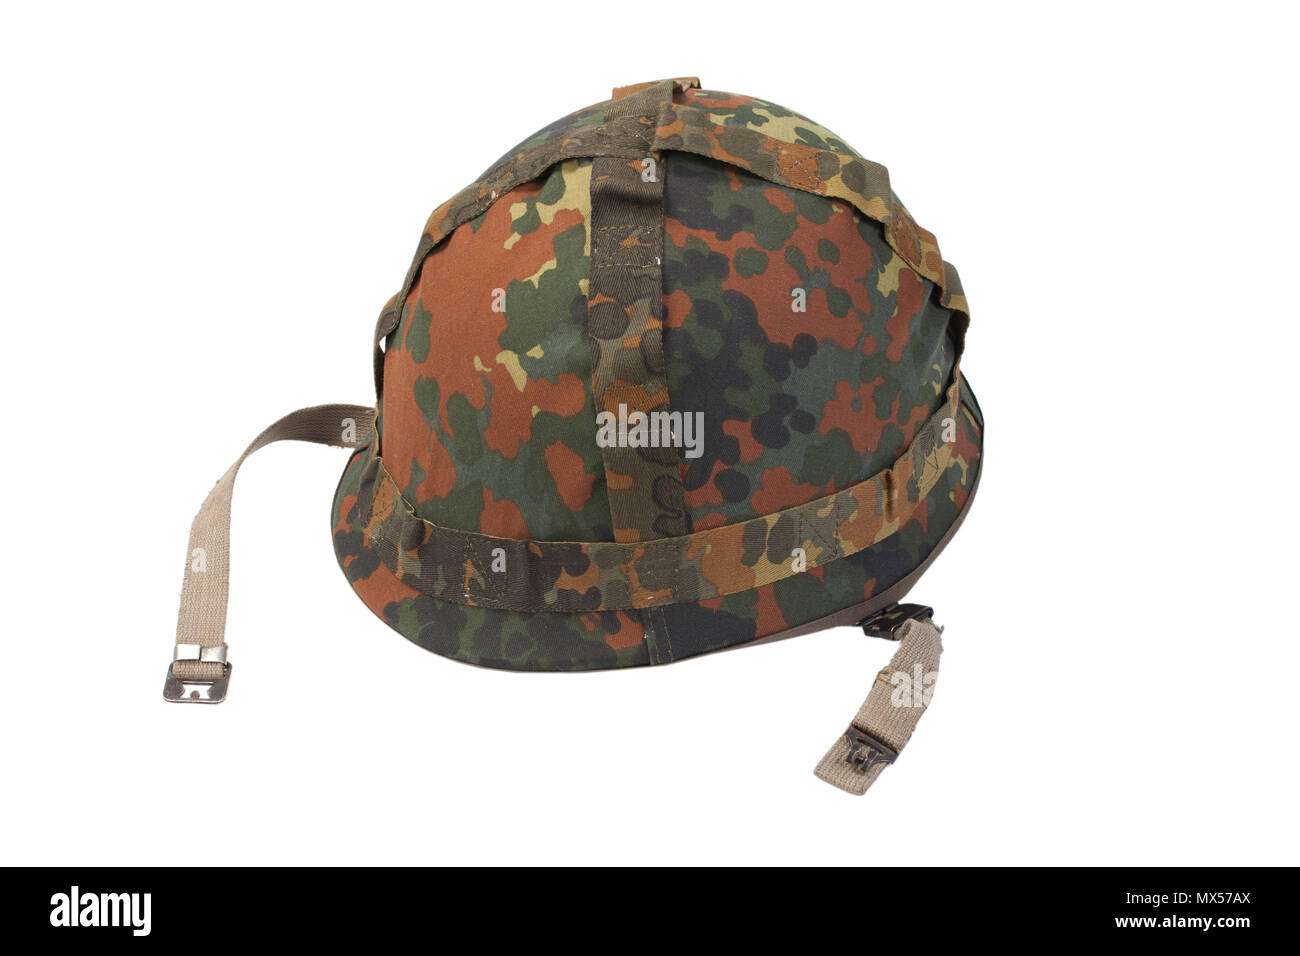 bundeswehr helmet with camouflage cover isolated on white background Stock Photo